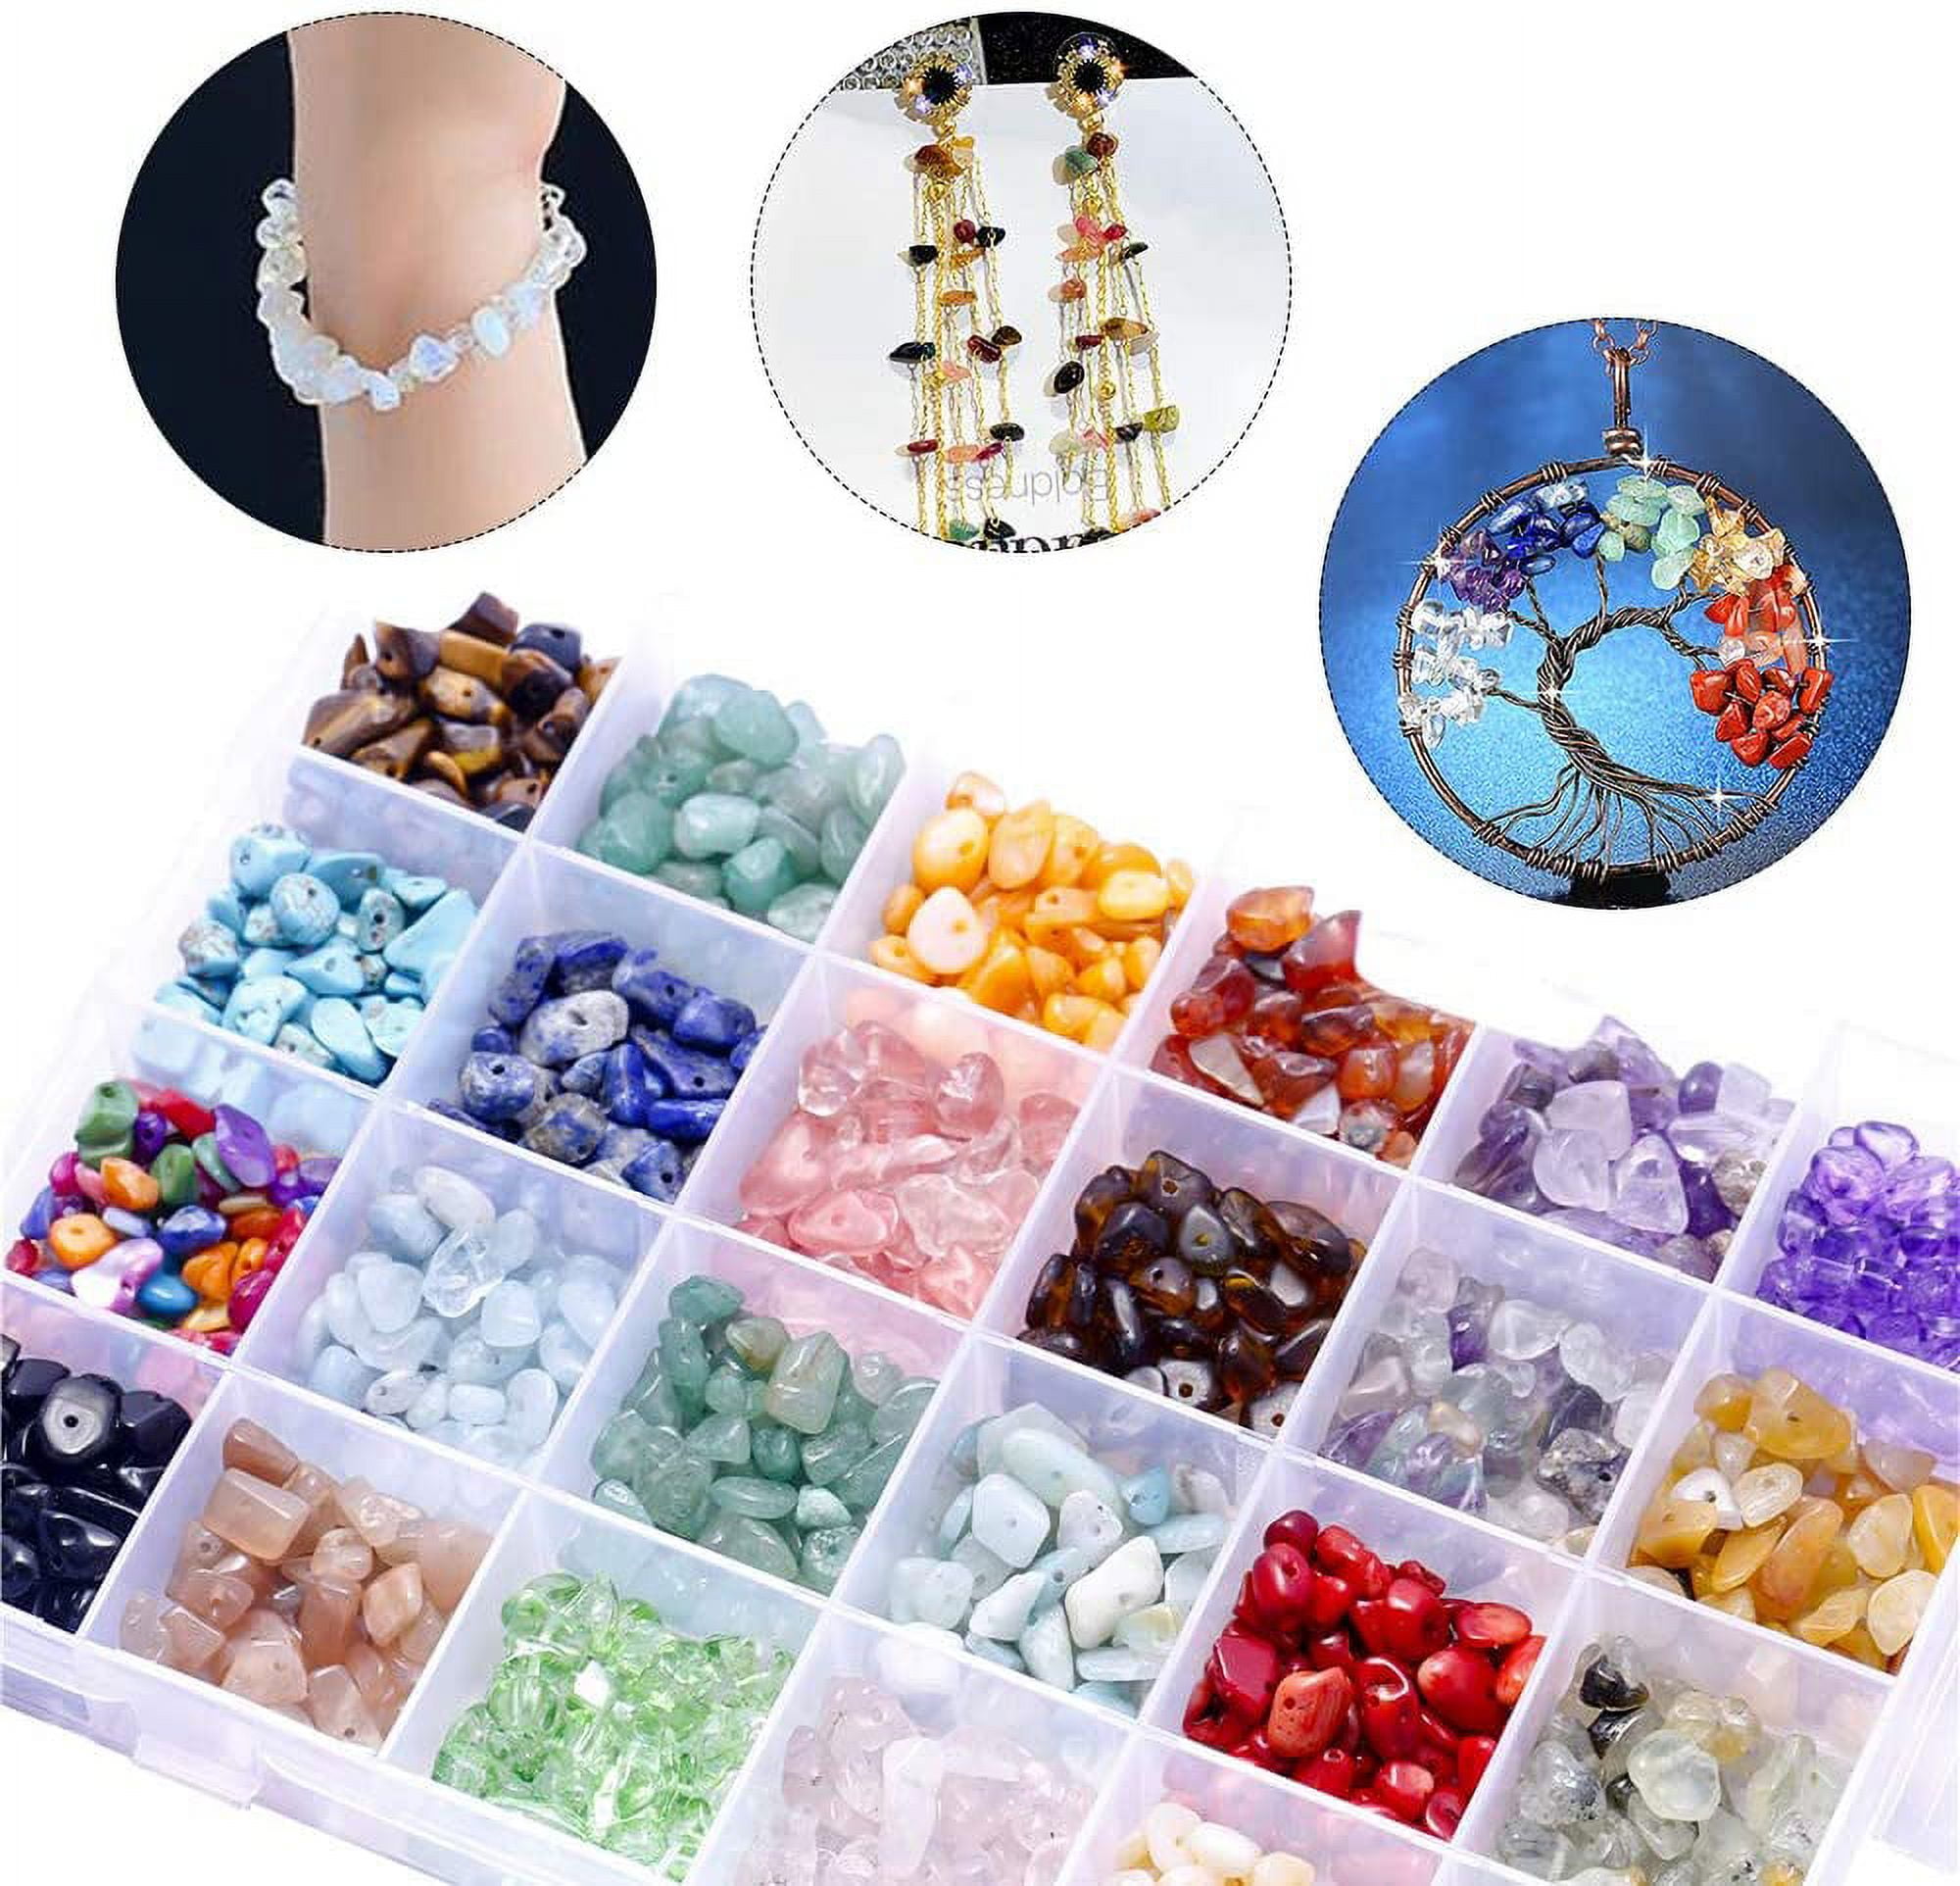 Efivs Arts 1500PCS Stone Beads, Crystal Beads Ring Making Kit Gemstone  Beads Set 24 Styles Crystal Pieces for Jewelry Making Crushed Chunked for  DIY Crafts for Mothers' Day Gift